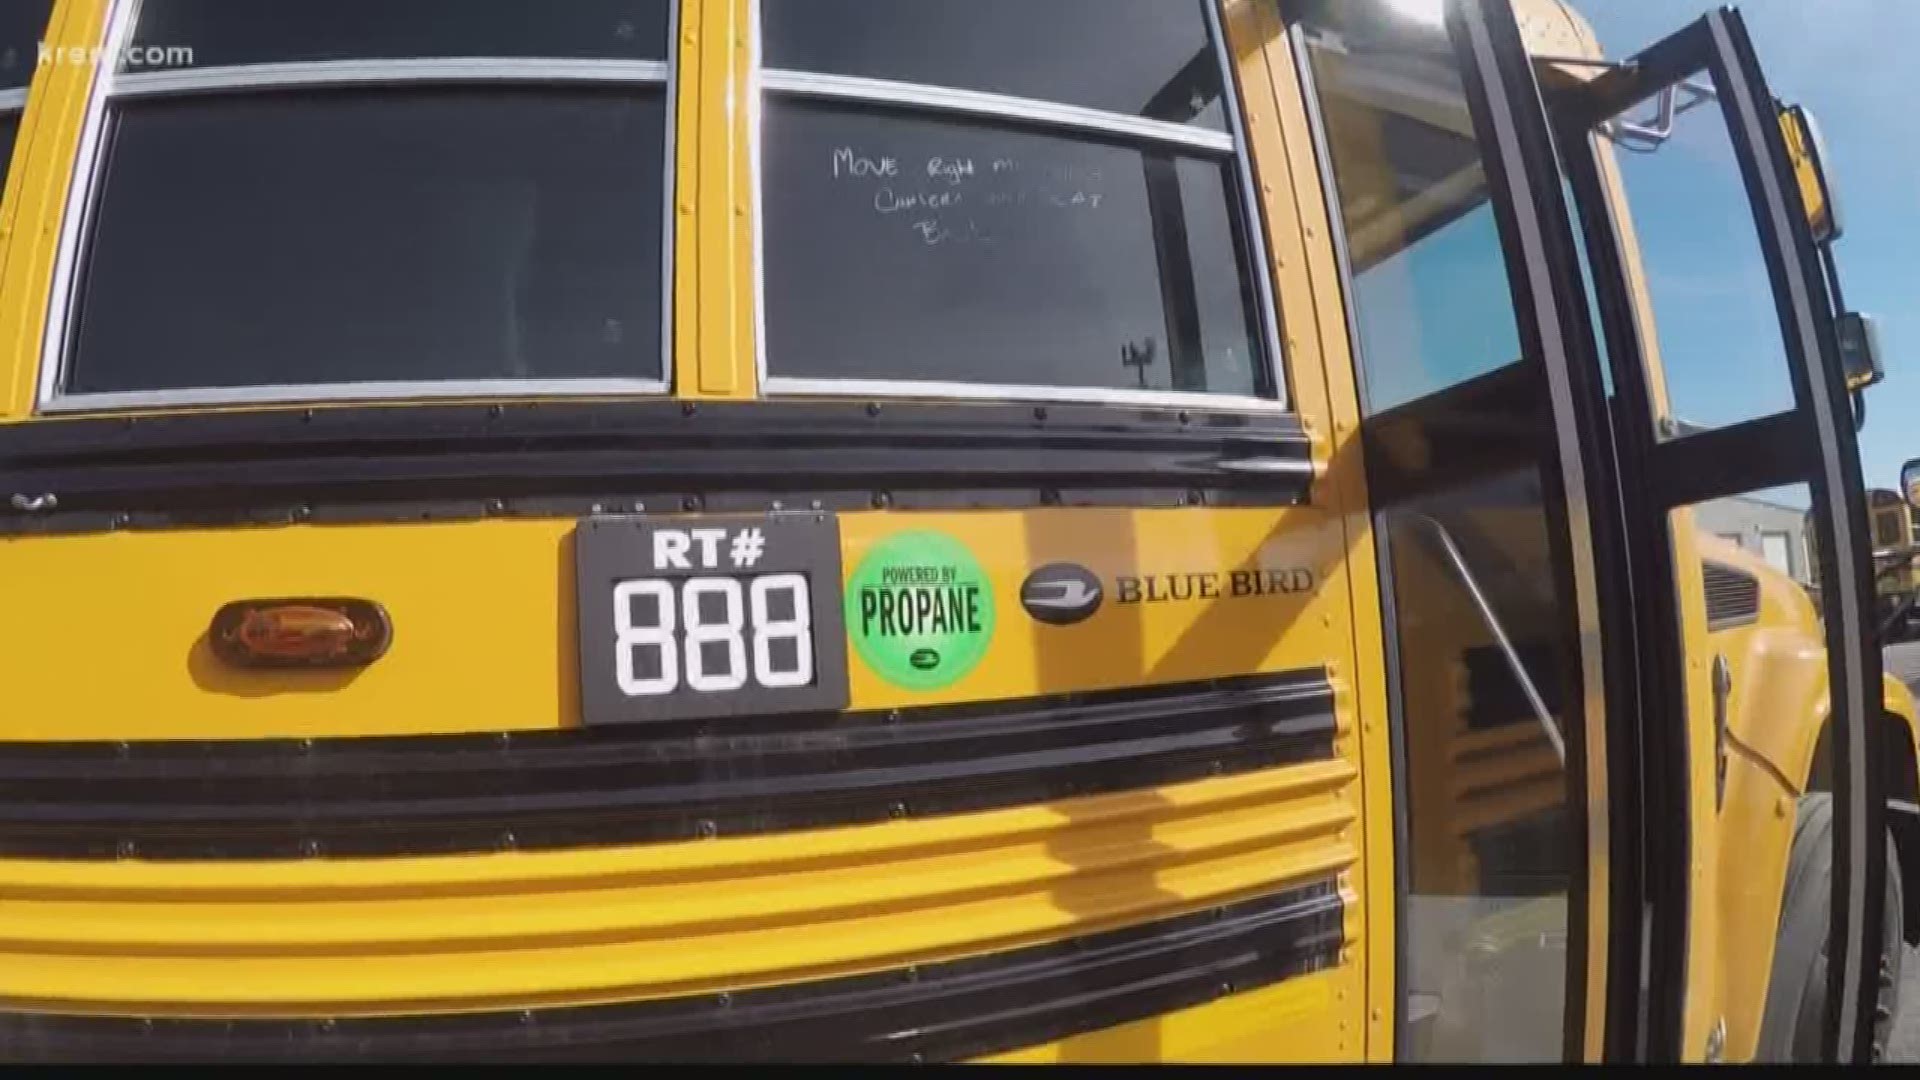 KREM Reporter Amanda Roley spoke with Spokane's Durham Bus Services, which provides school buses for SPS, about their new propane-powered buses.